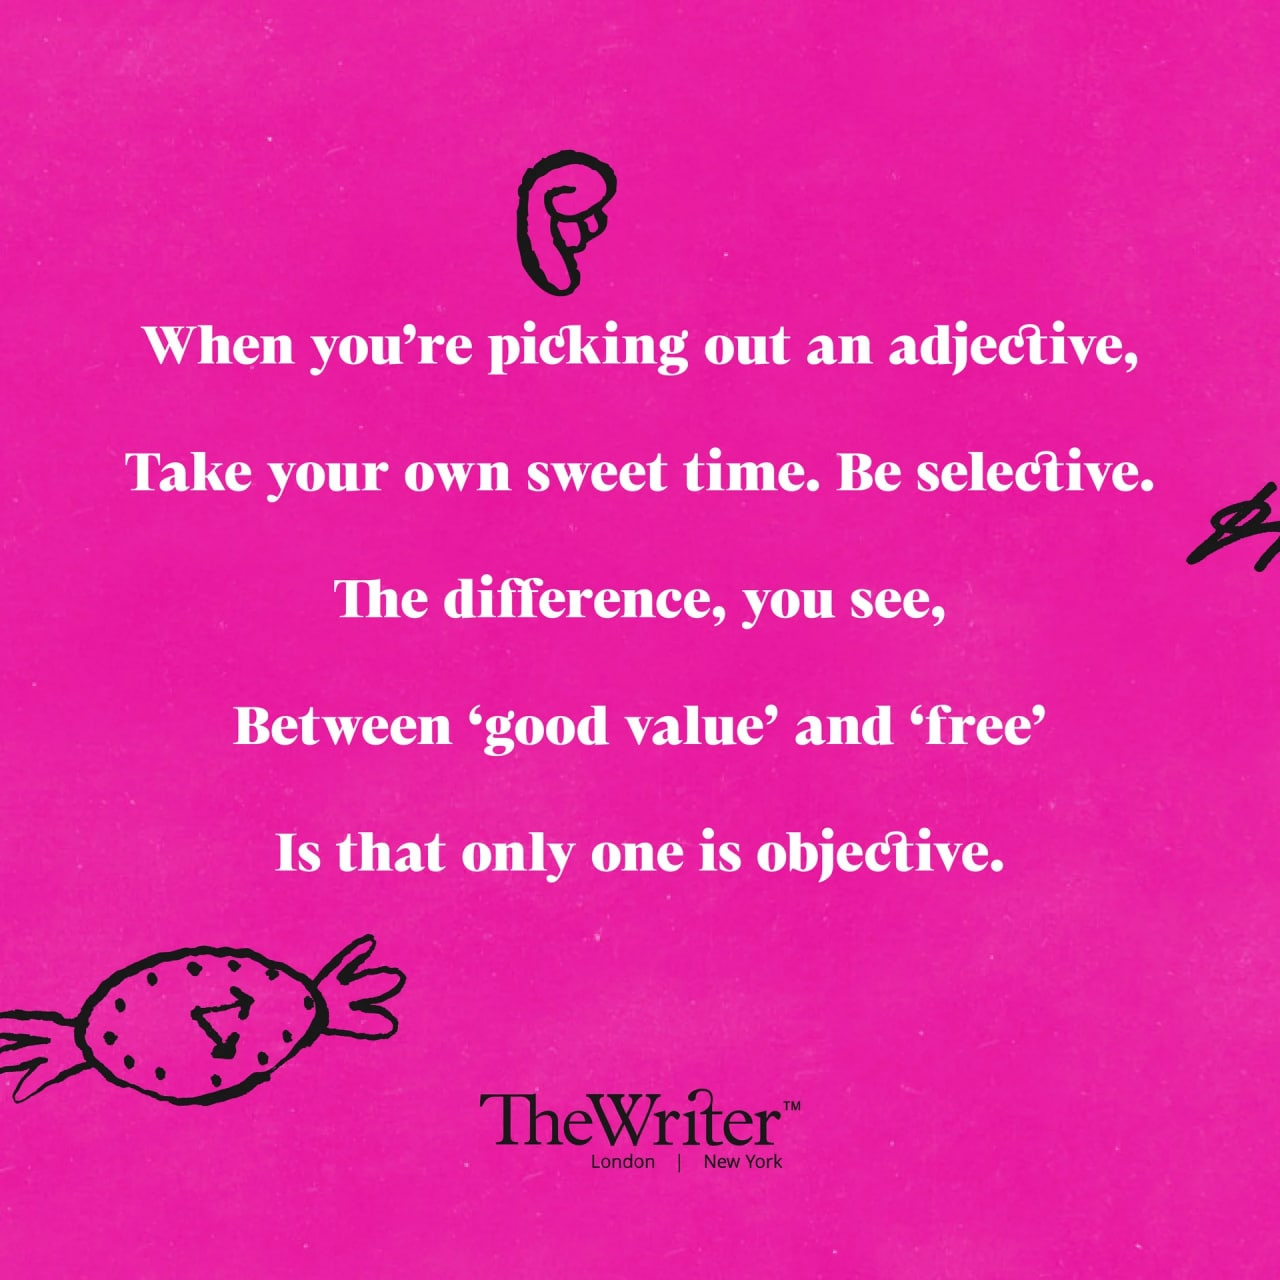 When you’re picking out an adjective, Take your own sweet time. Be selective. The difference, you see, Between ‘good value’ and ‘free’ Is that only one is objective.